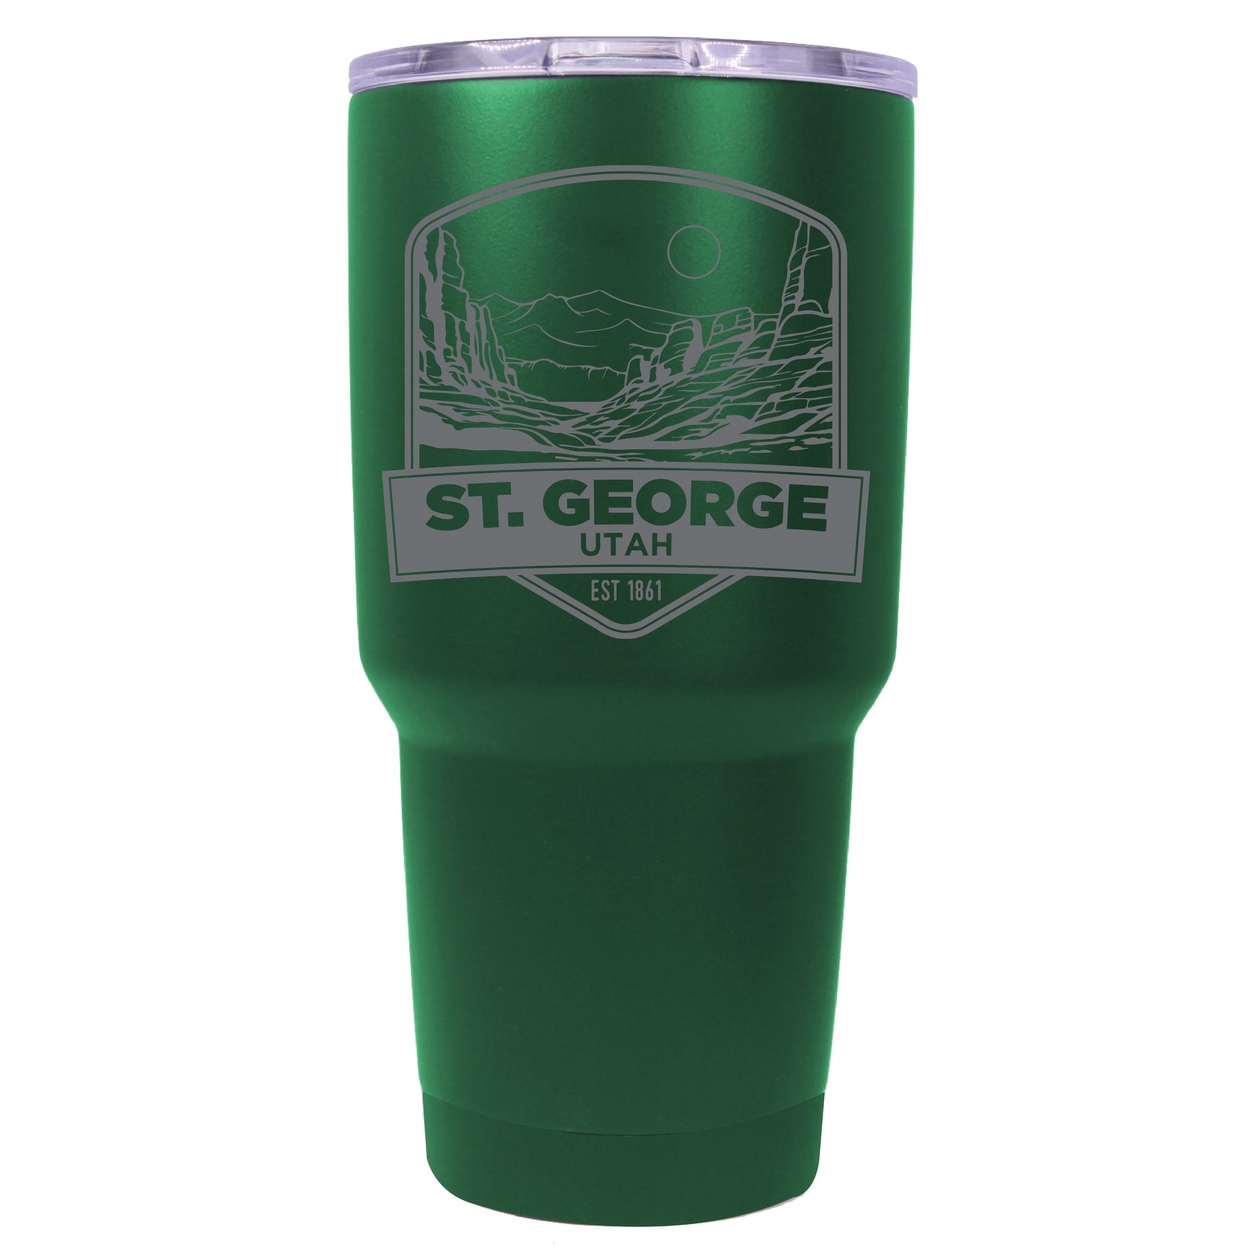 St. George Utah Souvenir 24 Oz Engraved Insulated Stainless Steel Tumbler - Green,,2-Pack